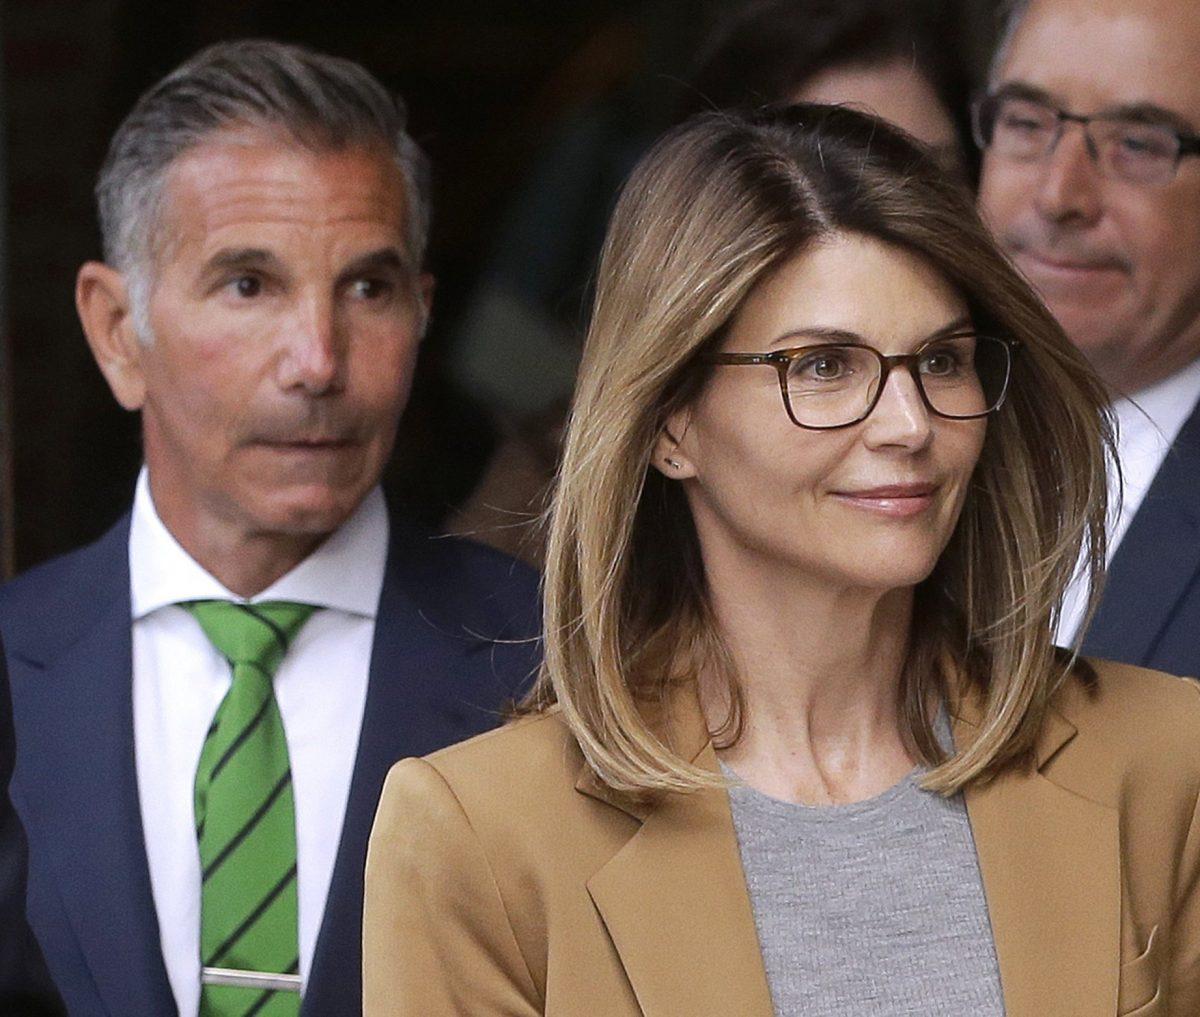 Actress Lori Loughlin and her husband, clothing designer Mossimo Giannulli (L) depart federal court in Boston, on April 3, 2019. (Steven Senne/AP photo)